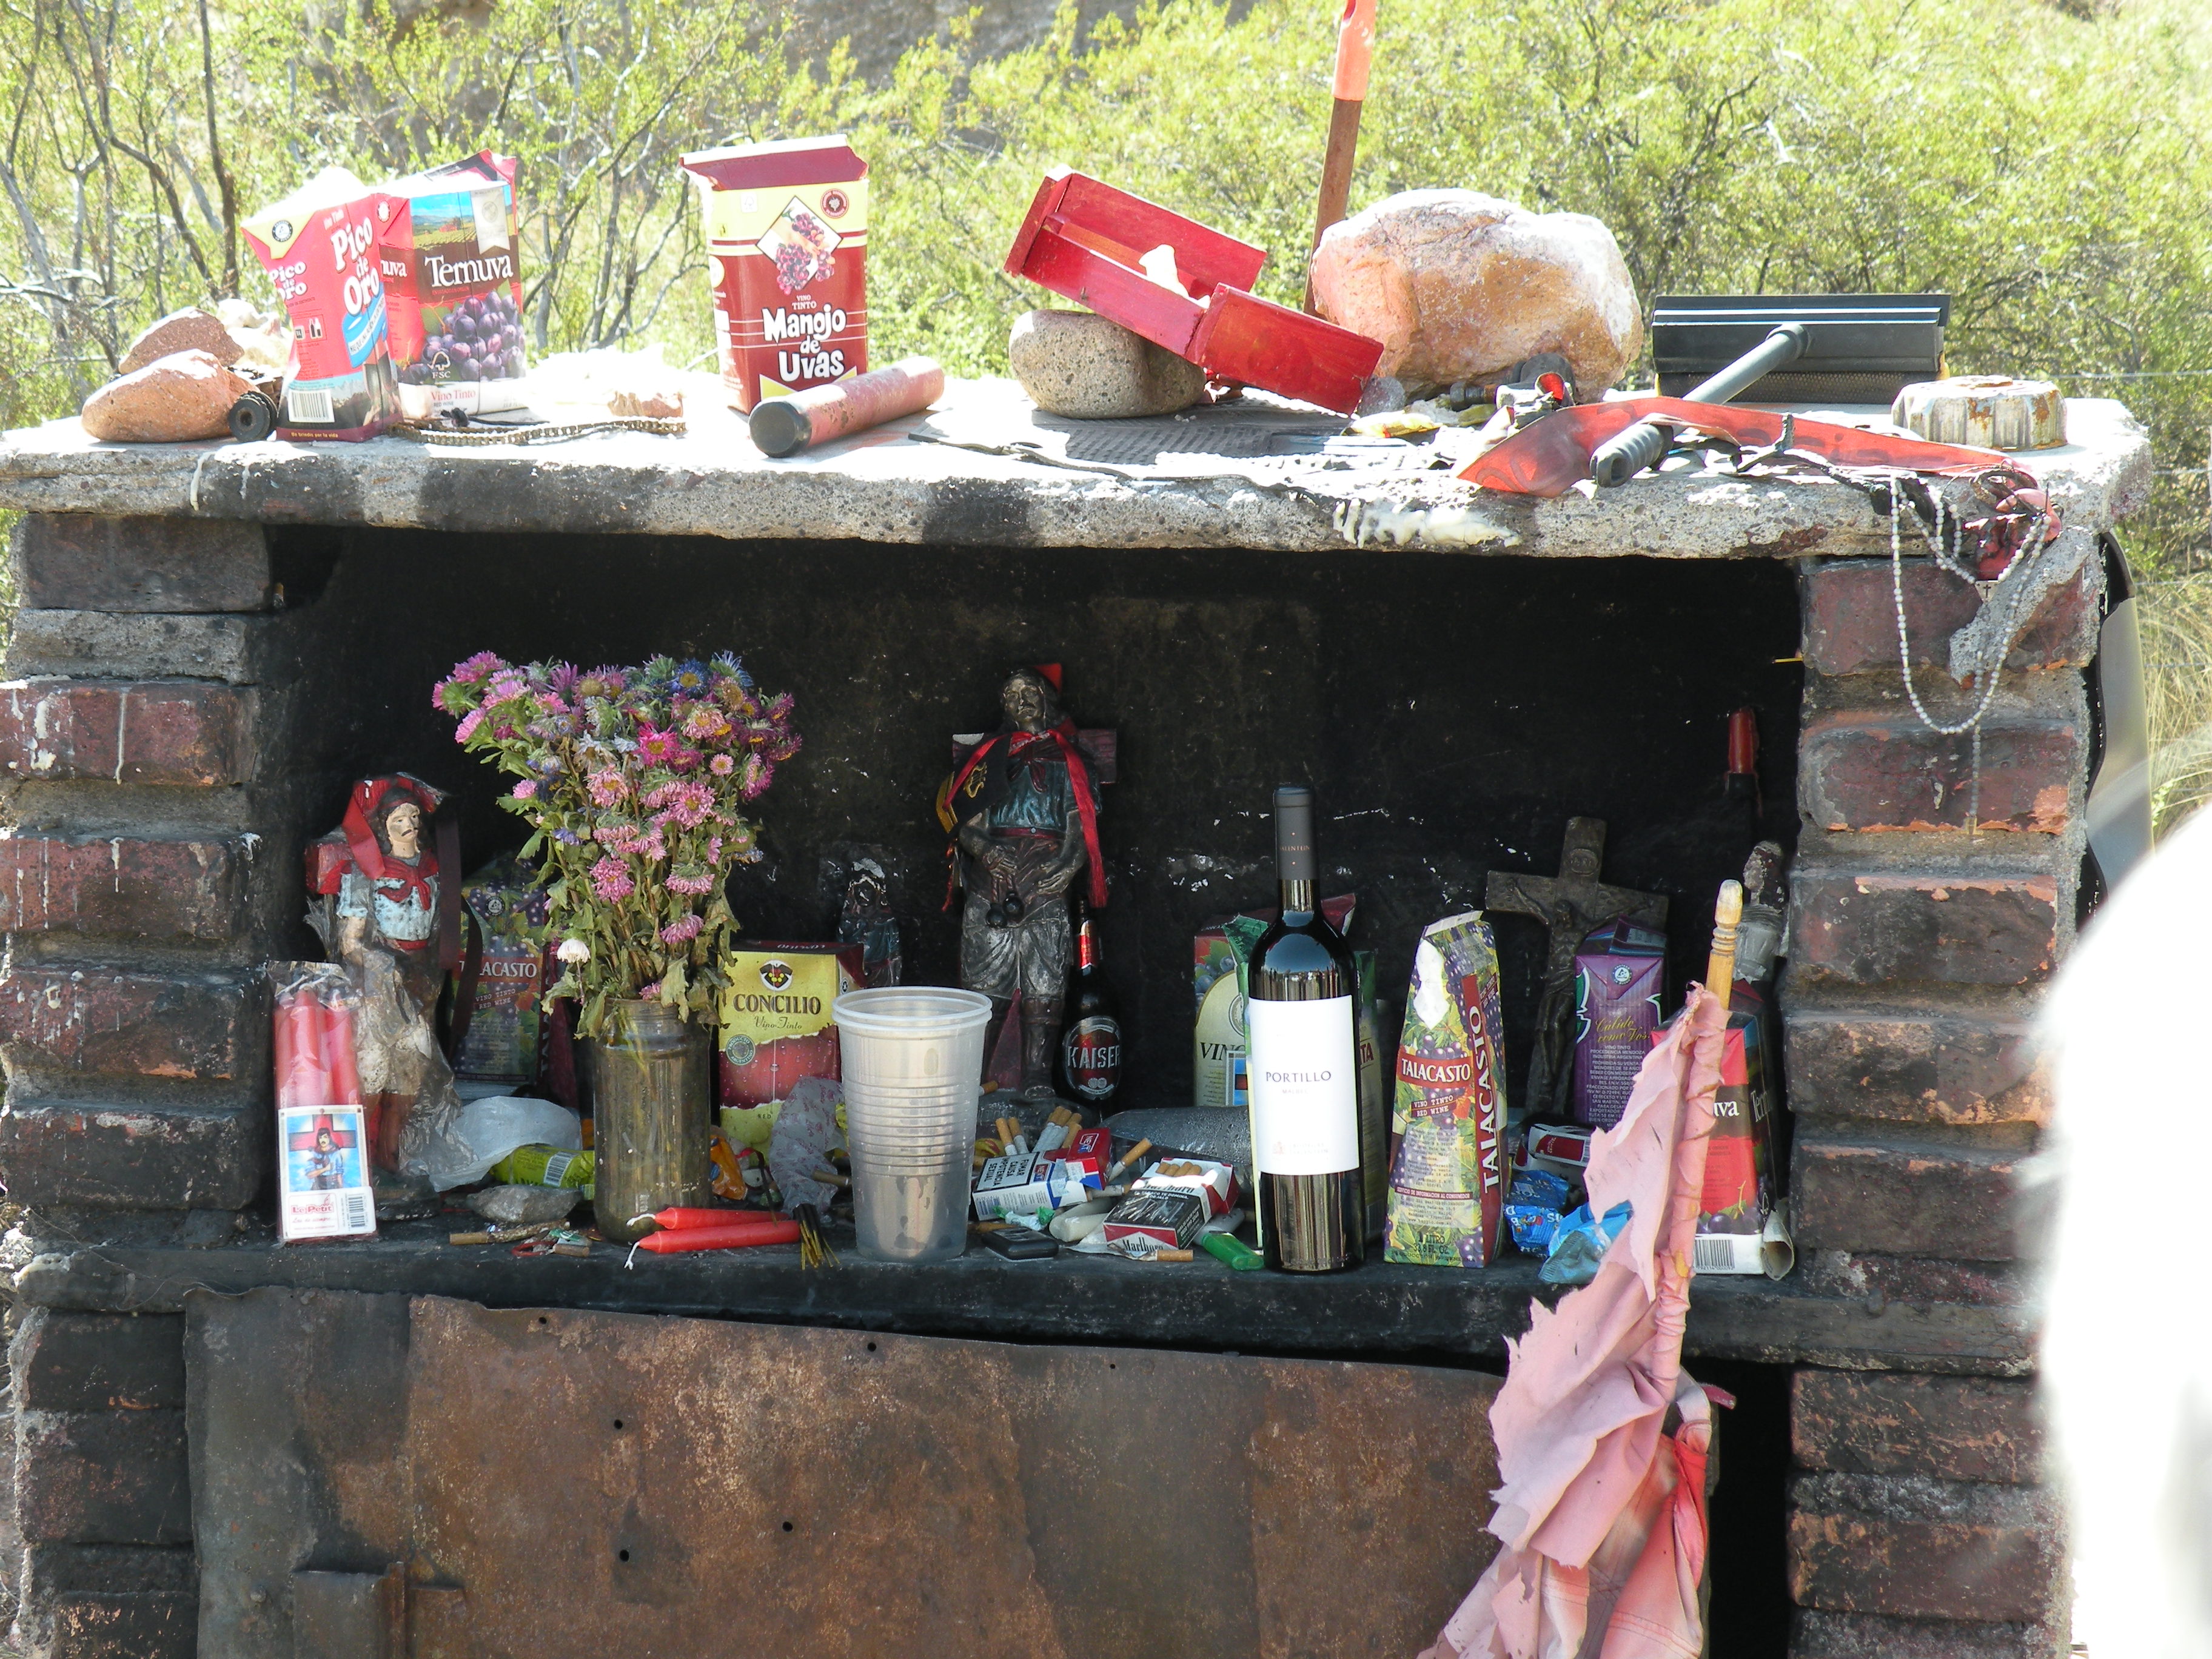 ONE OF THE MANY ROADSIDE SHRINES IN ARGENTINA DEDICATED TO GAUCHITO GIL